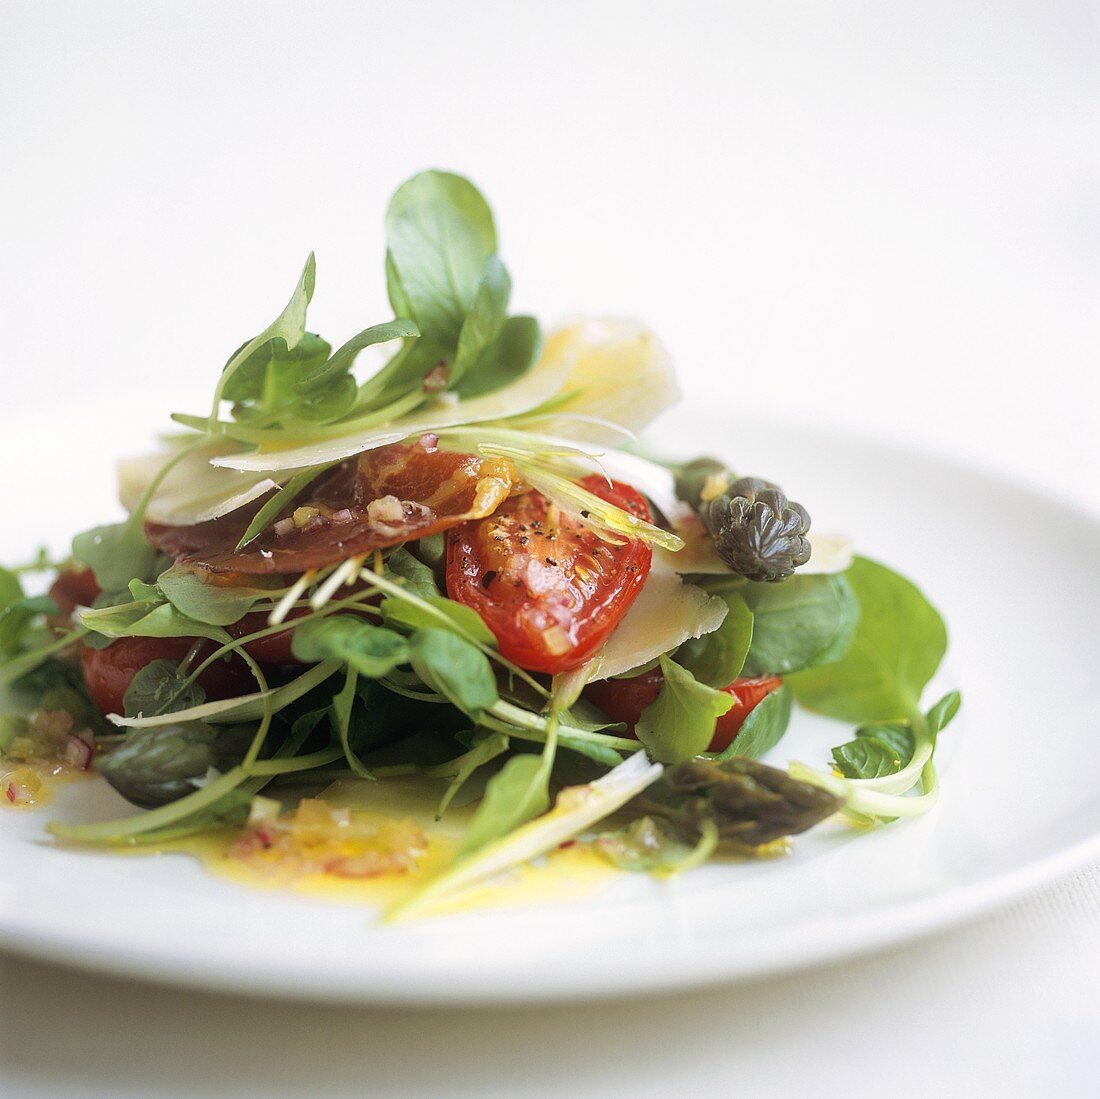 Watercress salad with tomato and Parmesan shavings